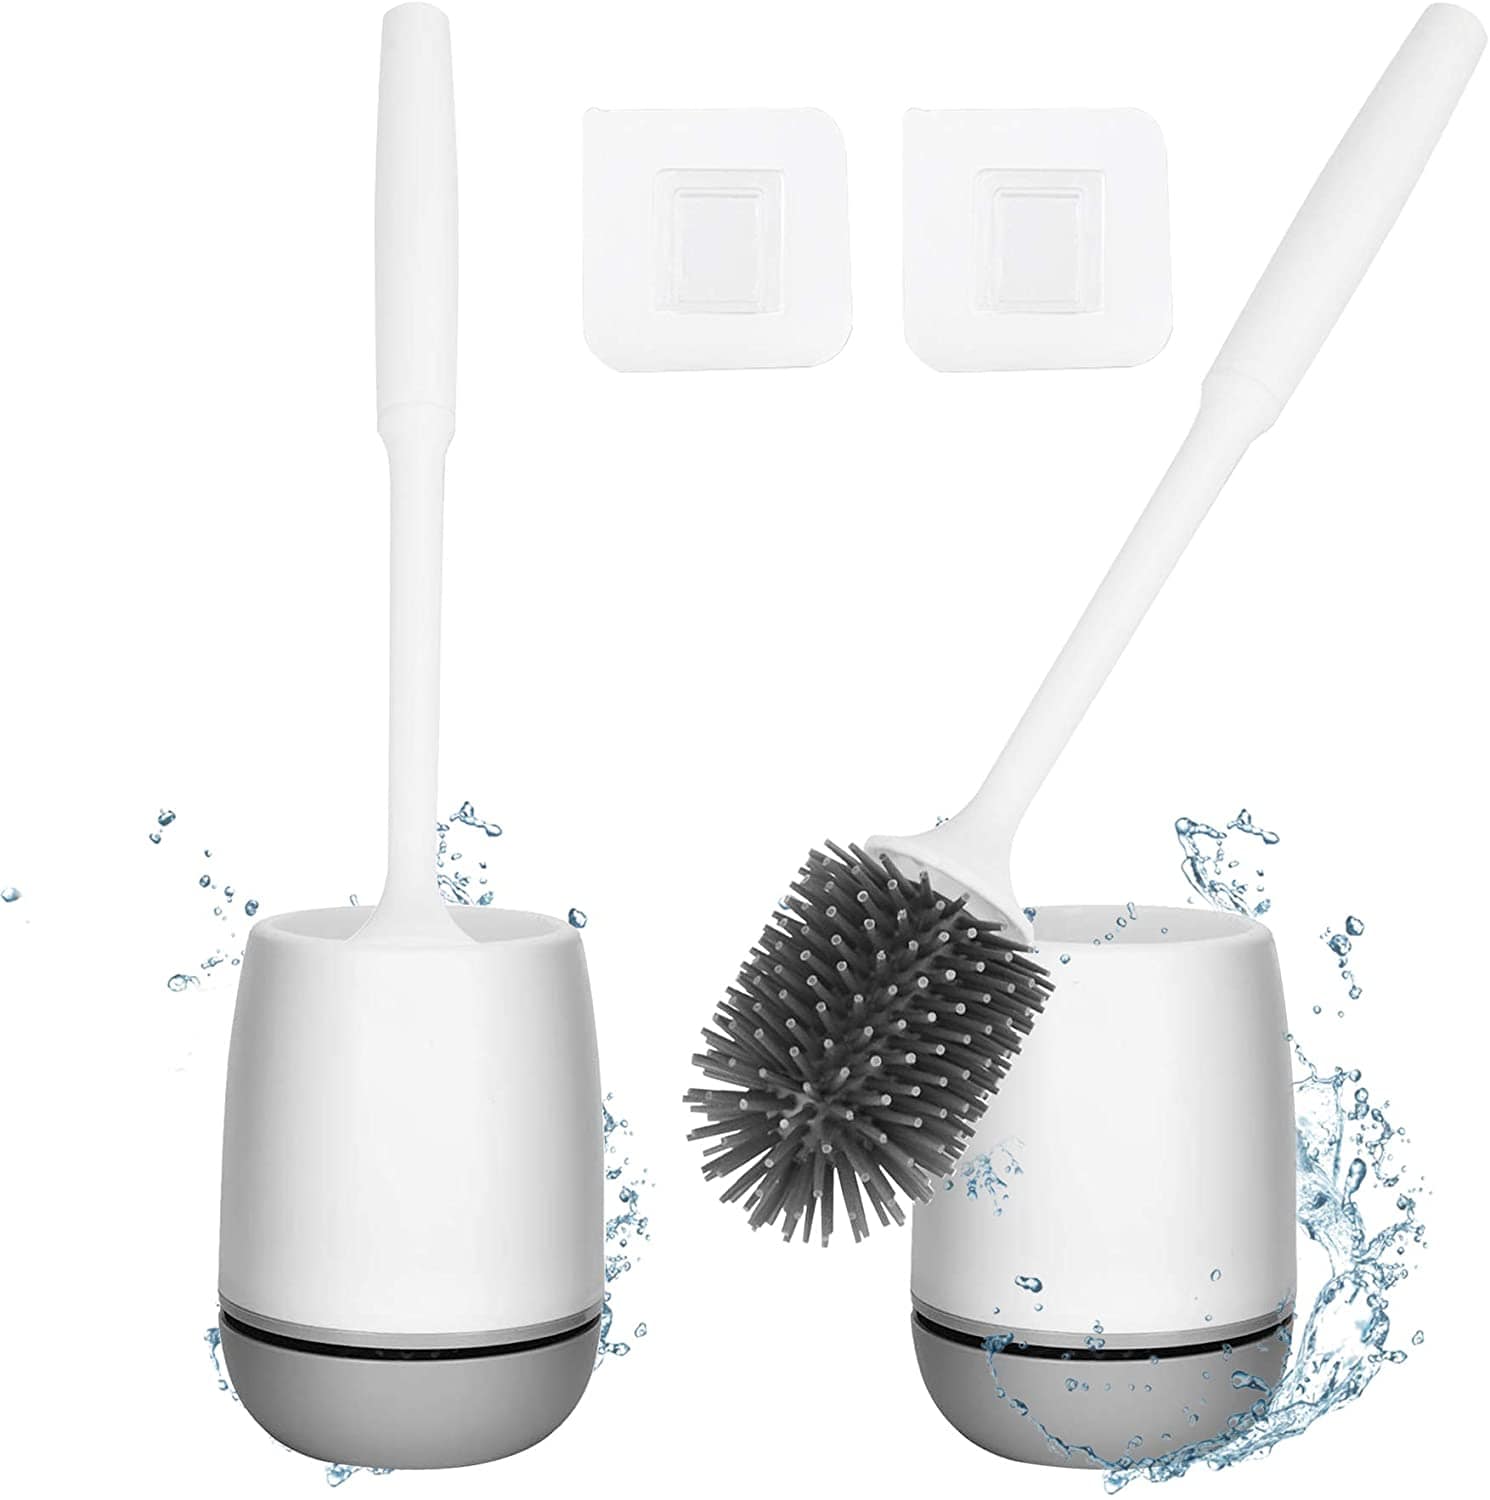 Lefree Silicone Toilet Brush,Household Toilet Bowl Brush and Holder  Set,Toilet Cleaner Brush,Wall Mounted Toilet Scrubber Without Drilling